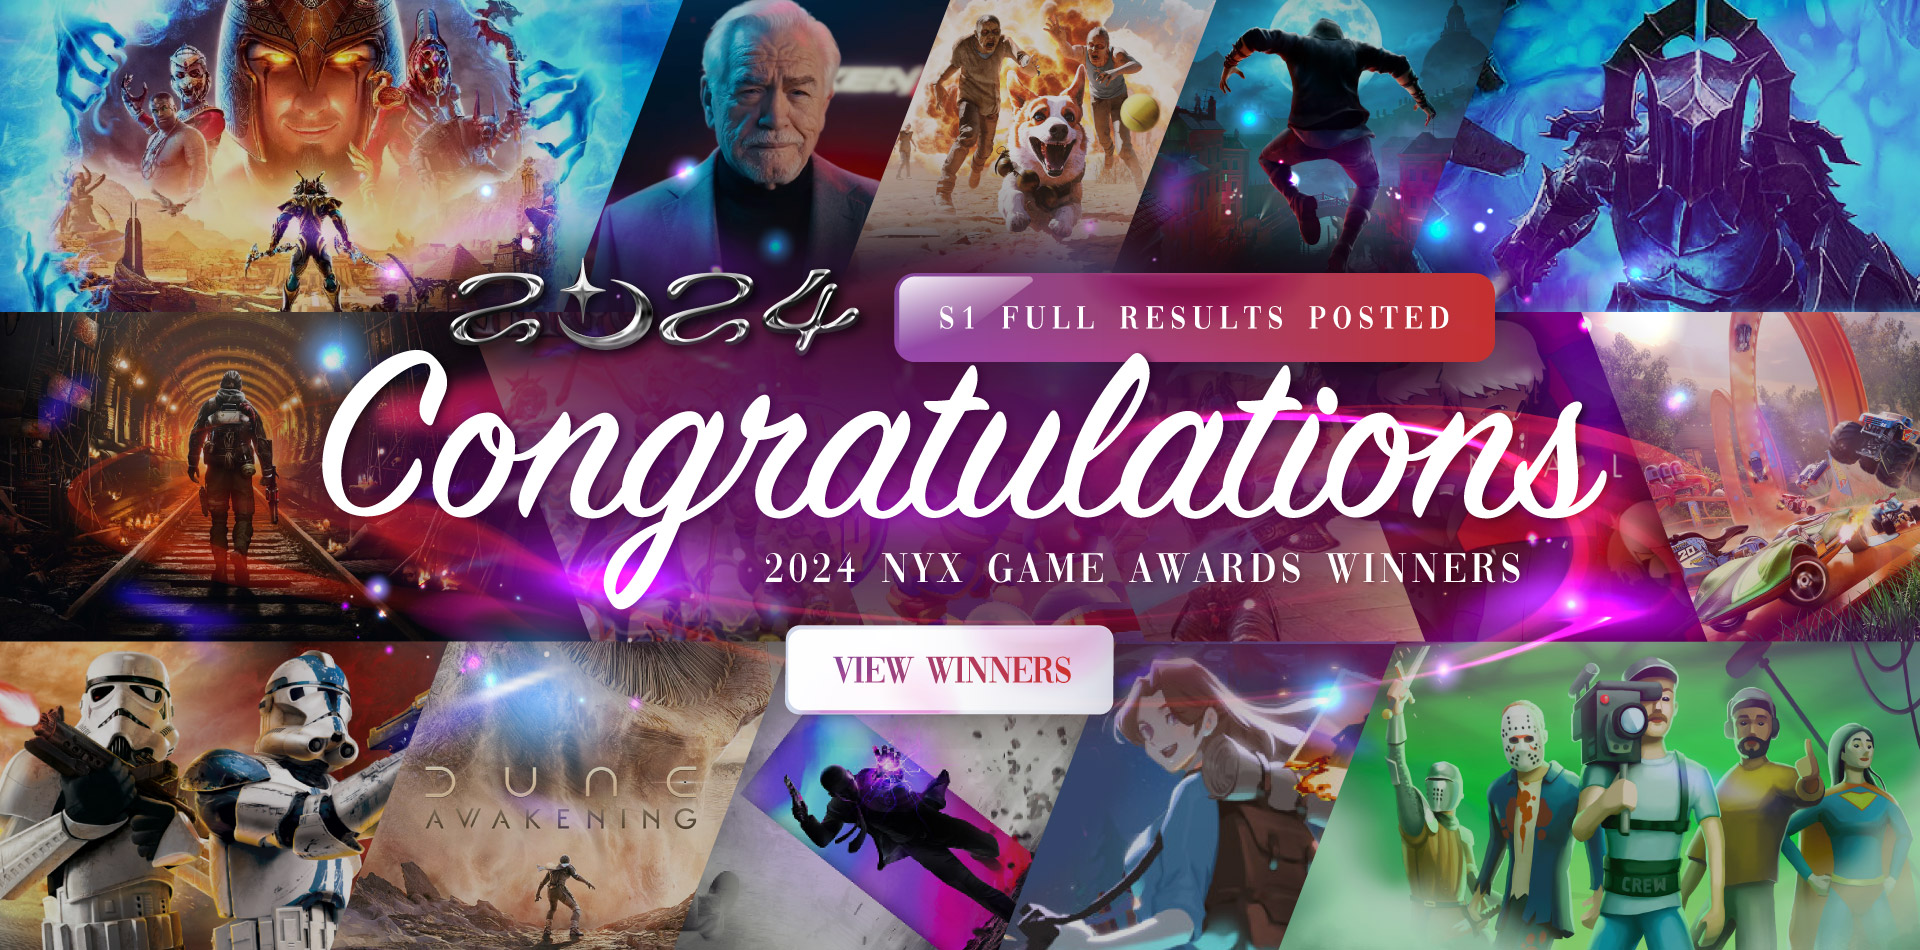 2024 NYX Game Awards S1 Full Results Announced